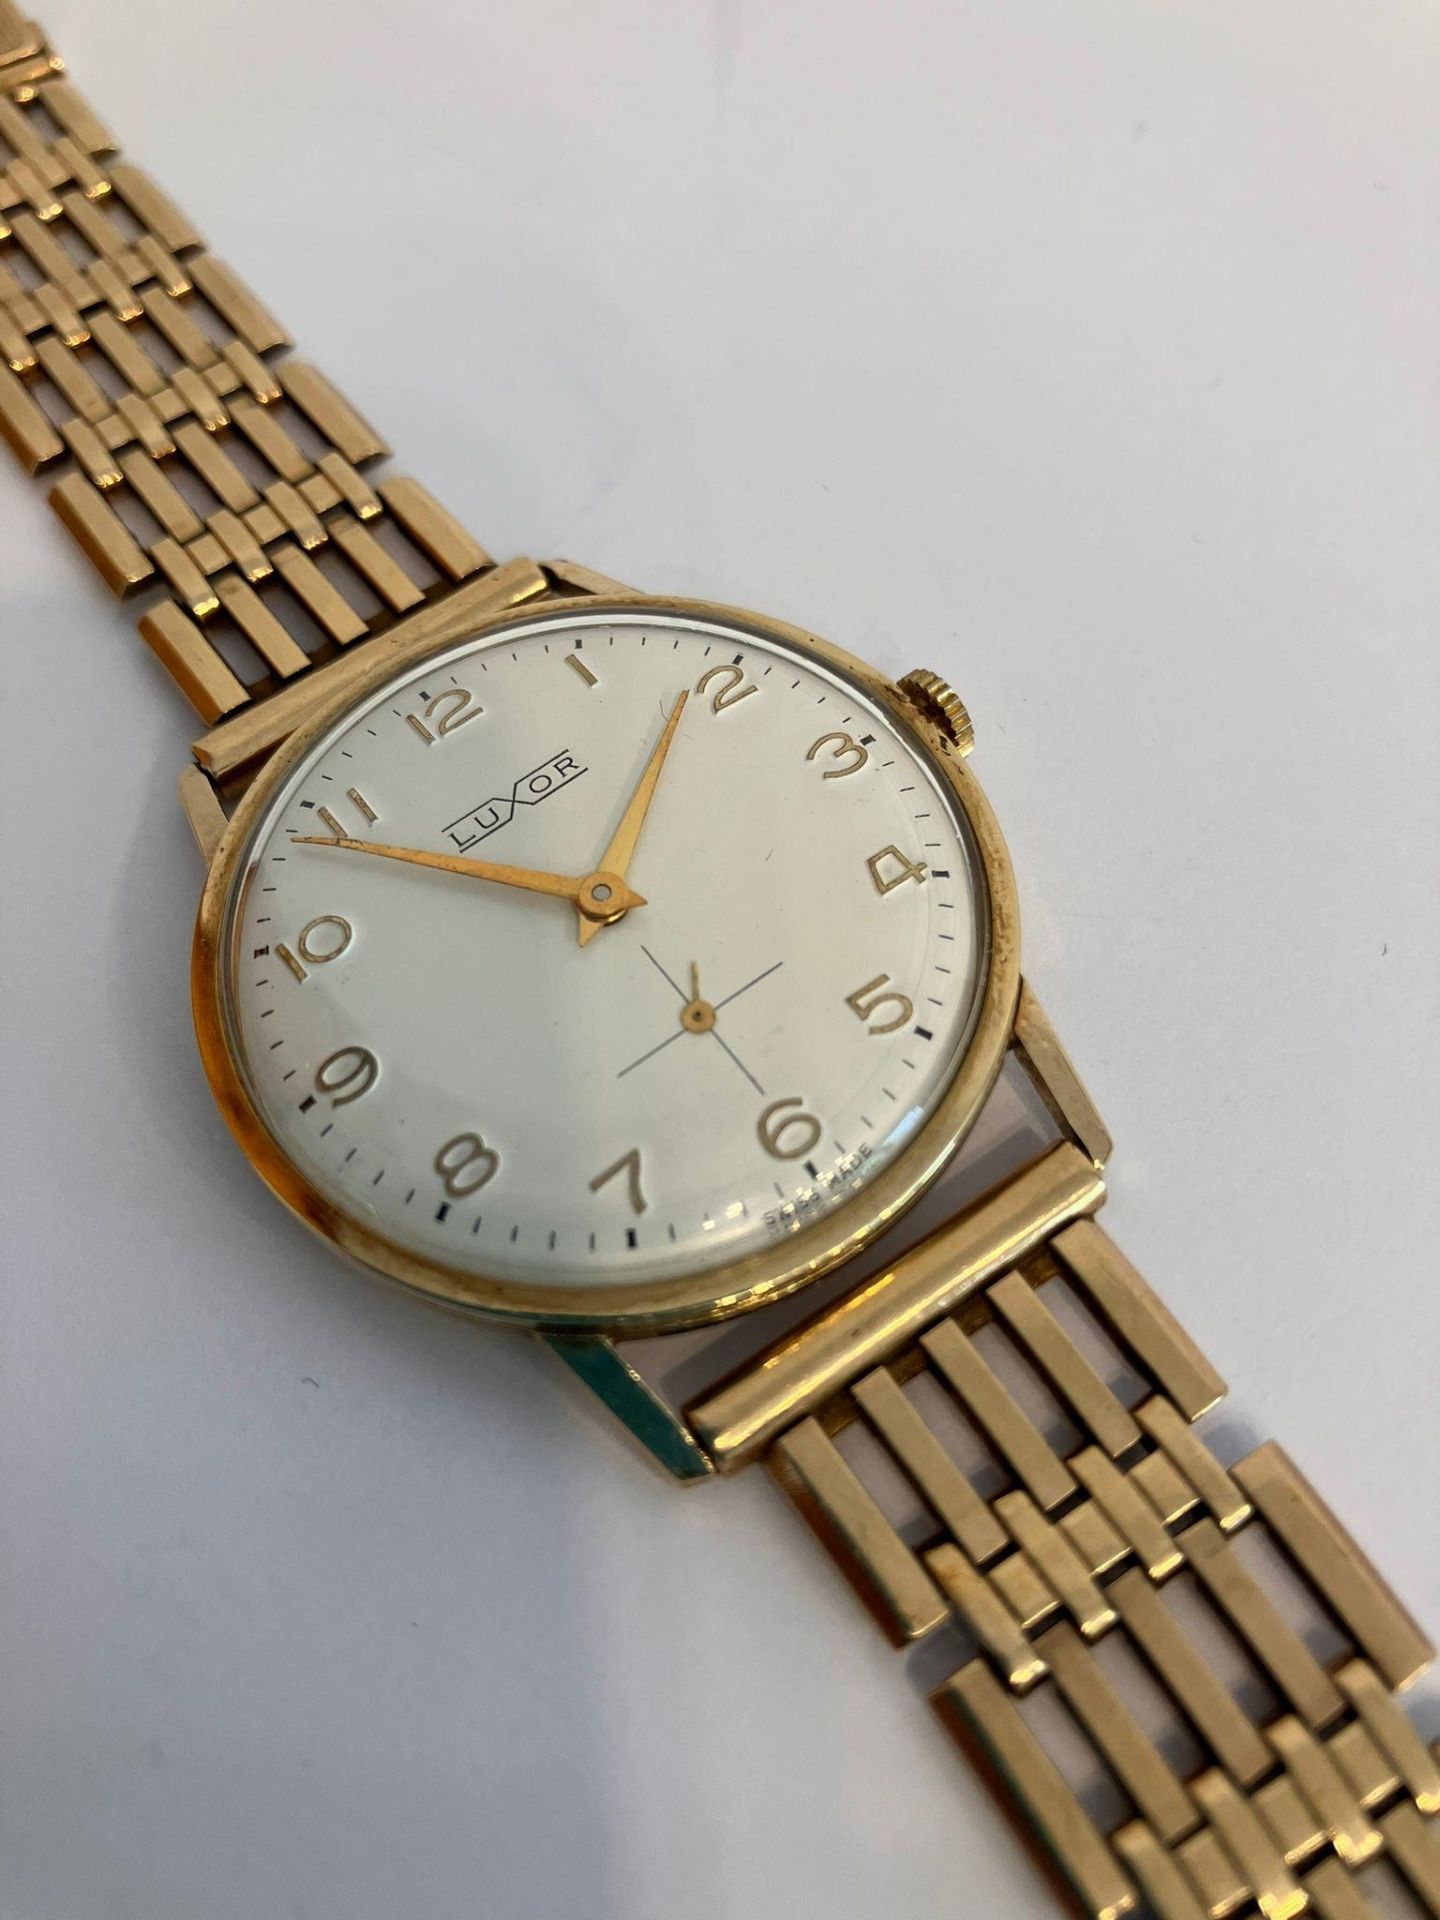 Gentleman’s vintage 14 carat GOLD LUXOR WRISTWATCH. Having white face with gold hands and digits. - Image 8 of 8